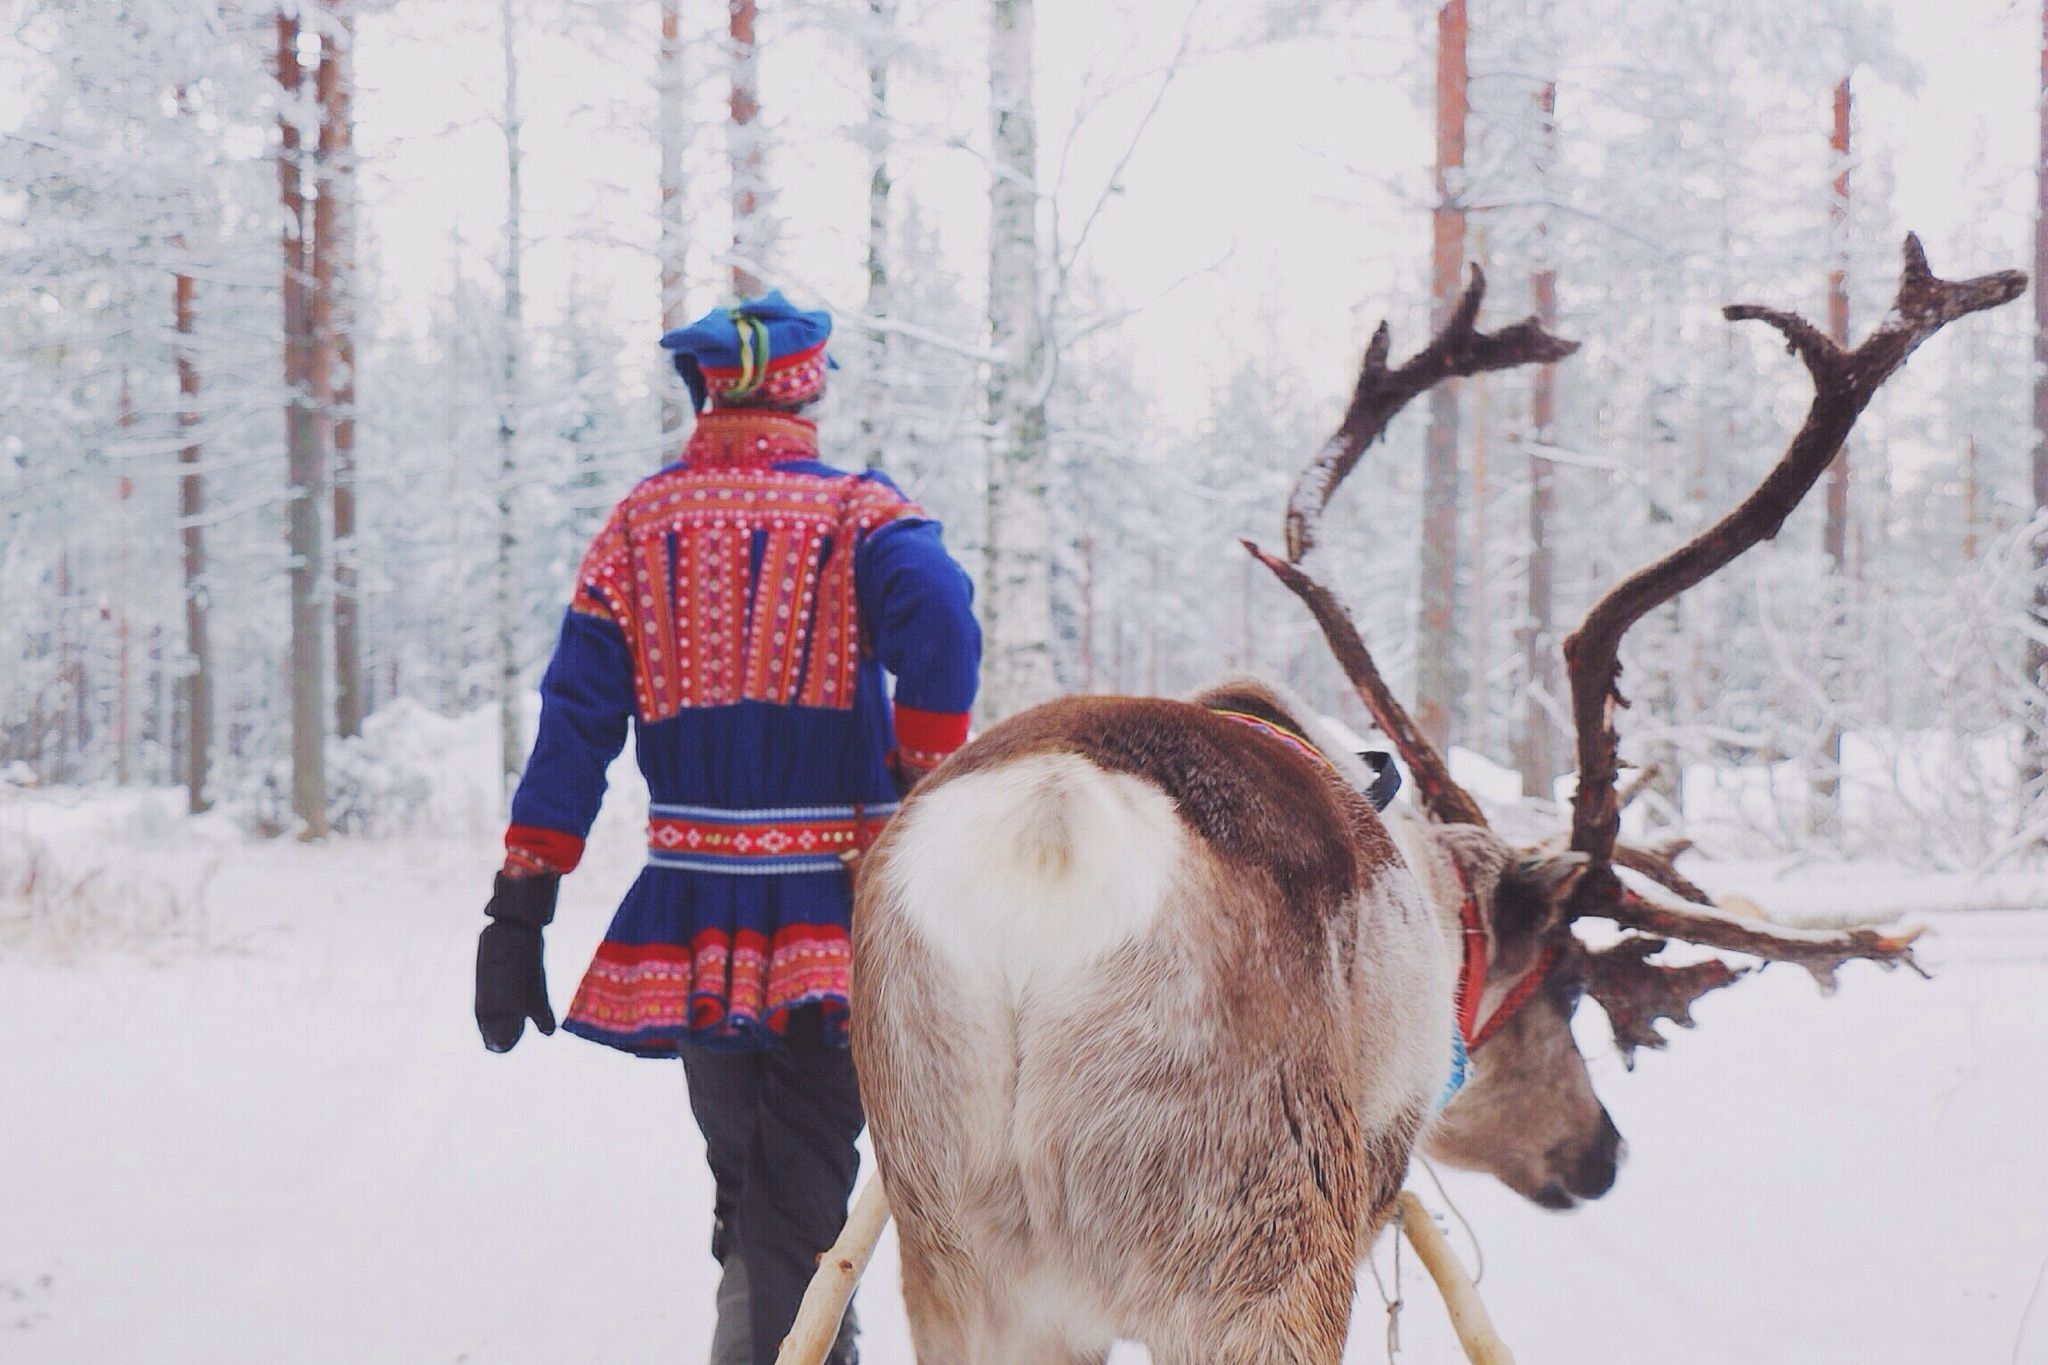 Rear View Of Man Walking With Reindeer In Snow Forest